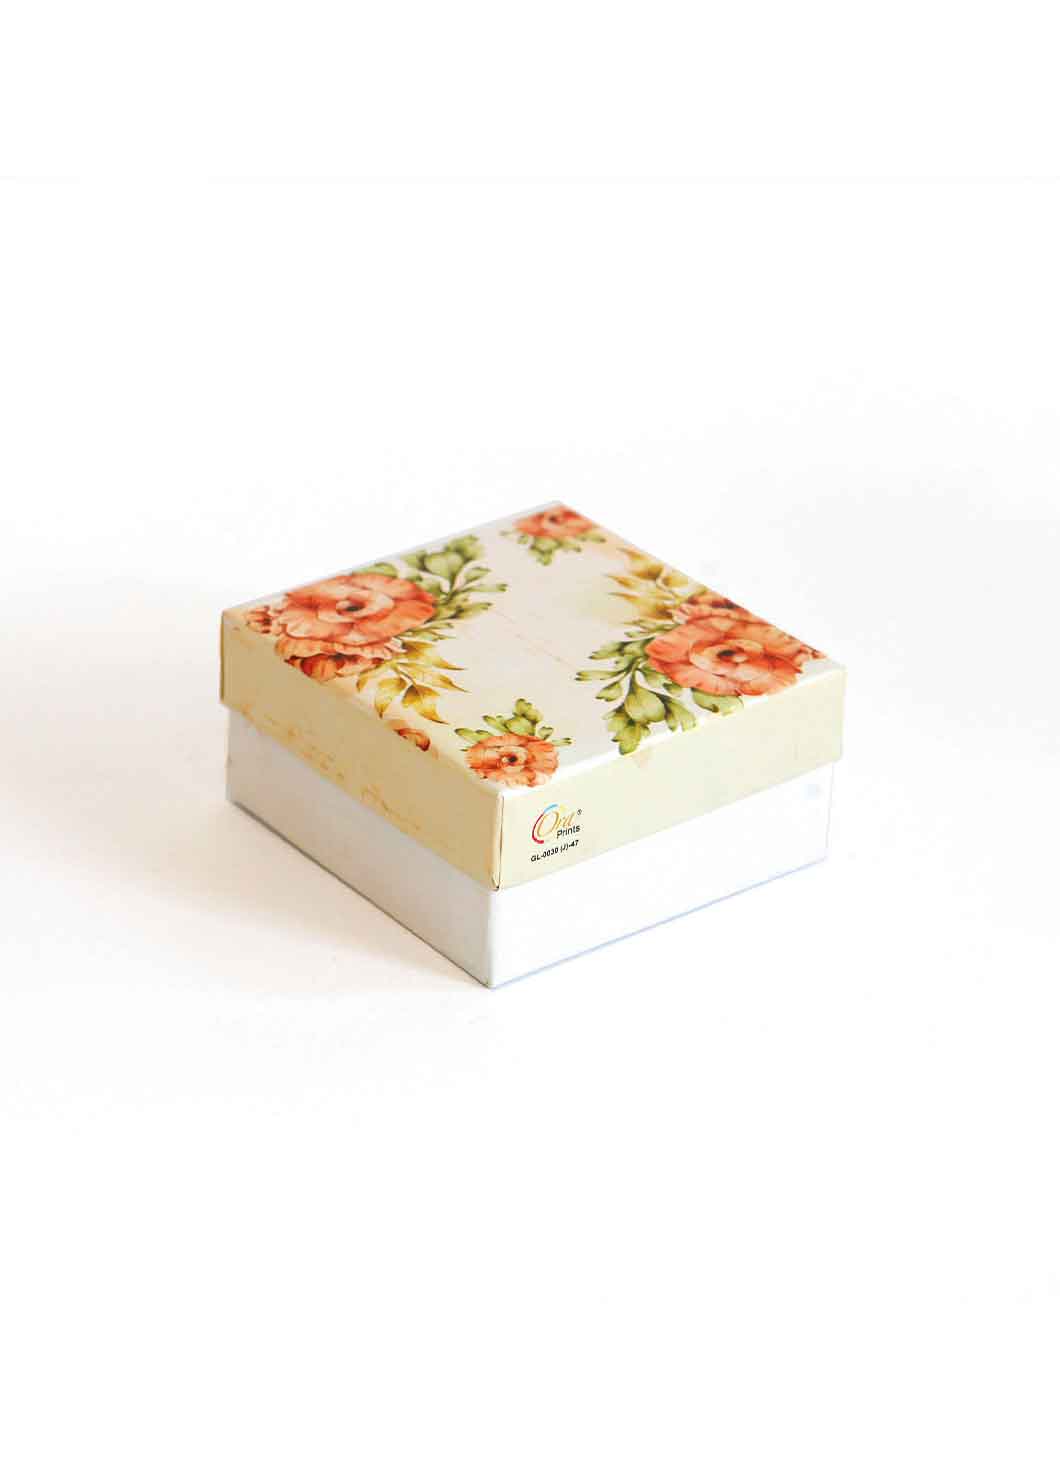 Off White Floral Design Box for Packing